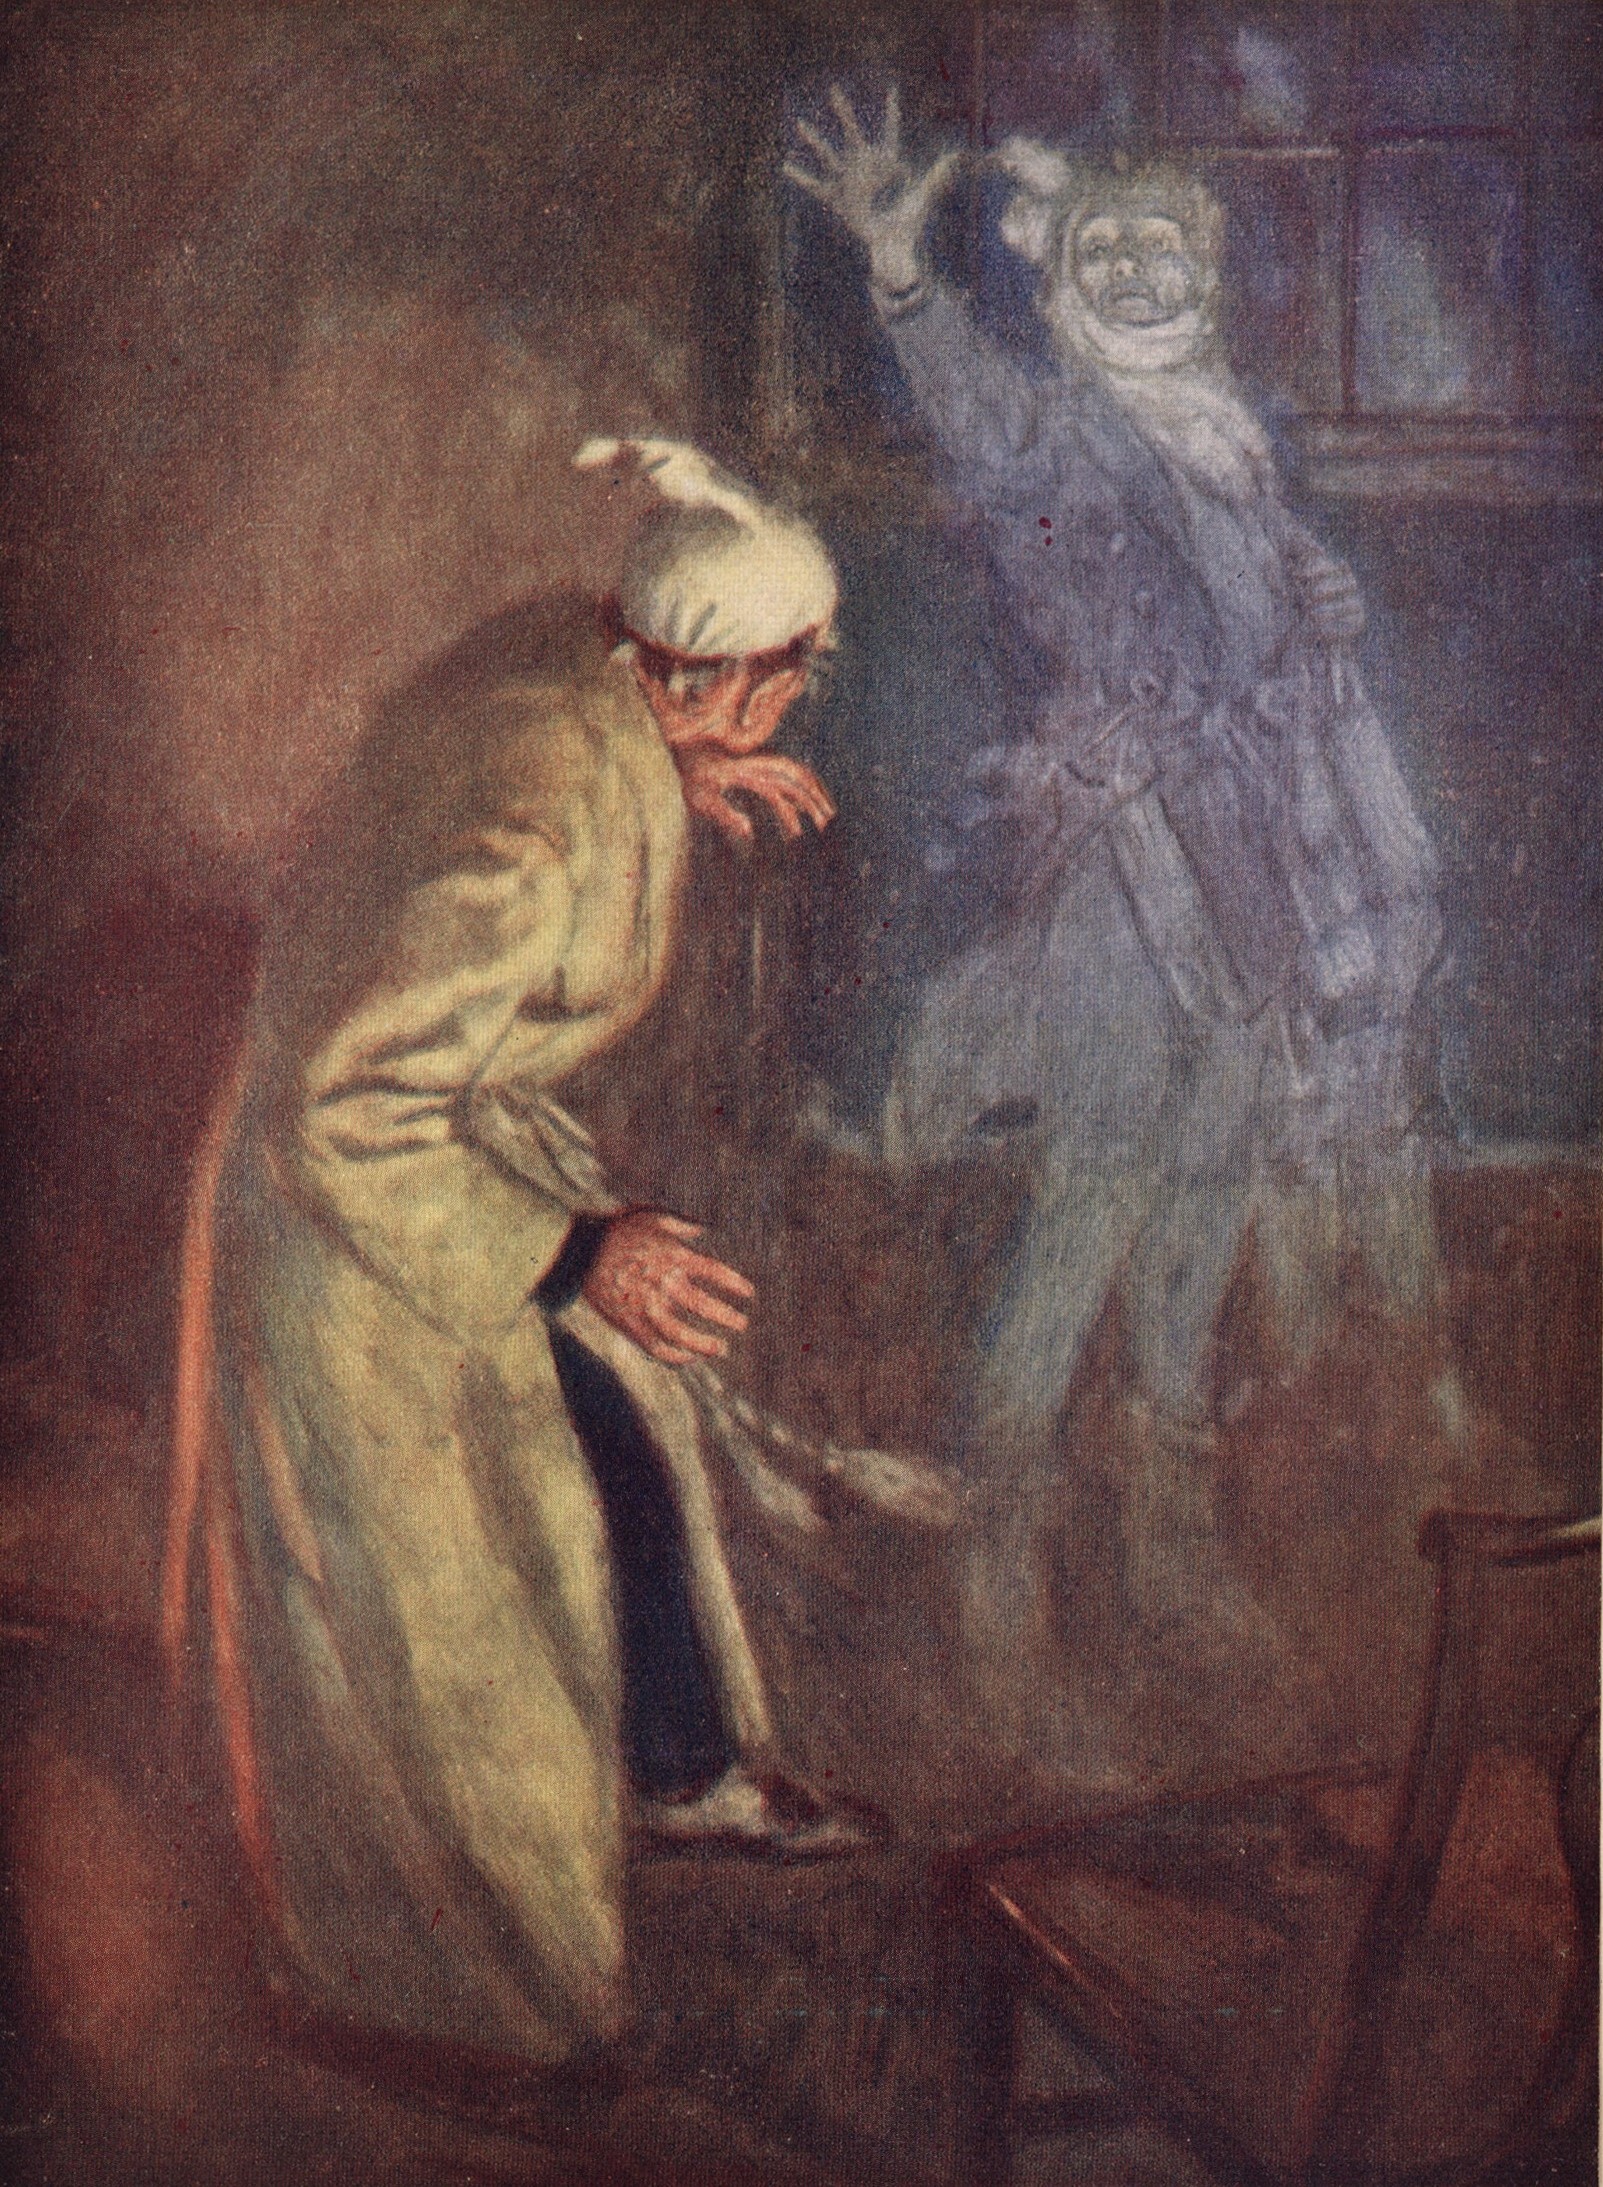 An illustration of Ebenezer Scrooge meeting the ghost of Jacob Marley